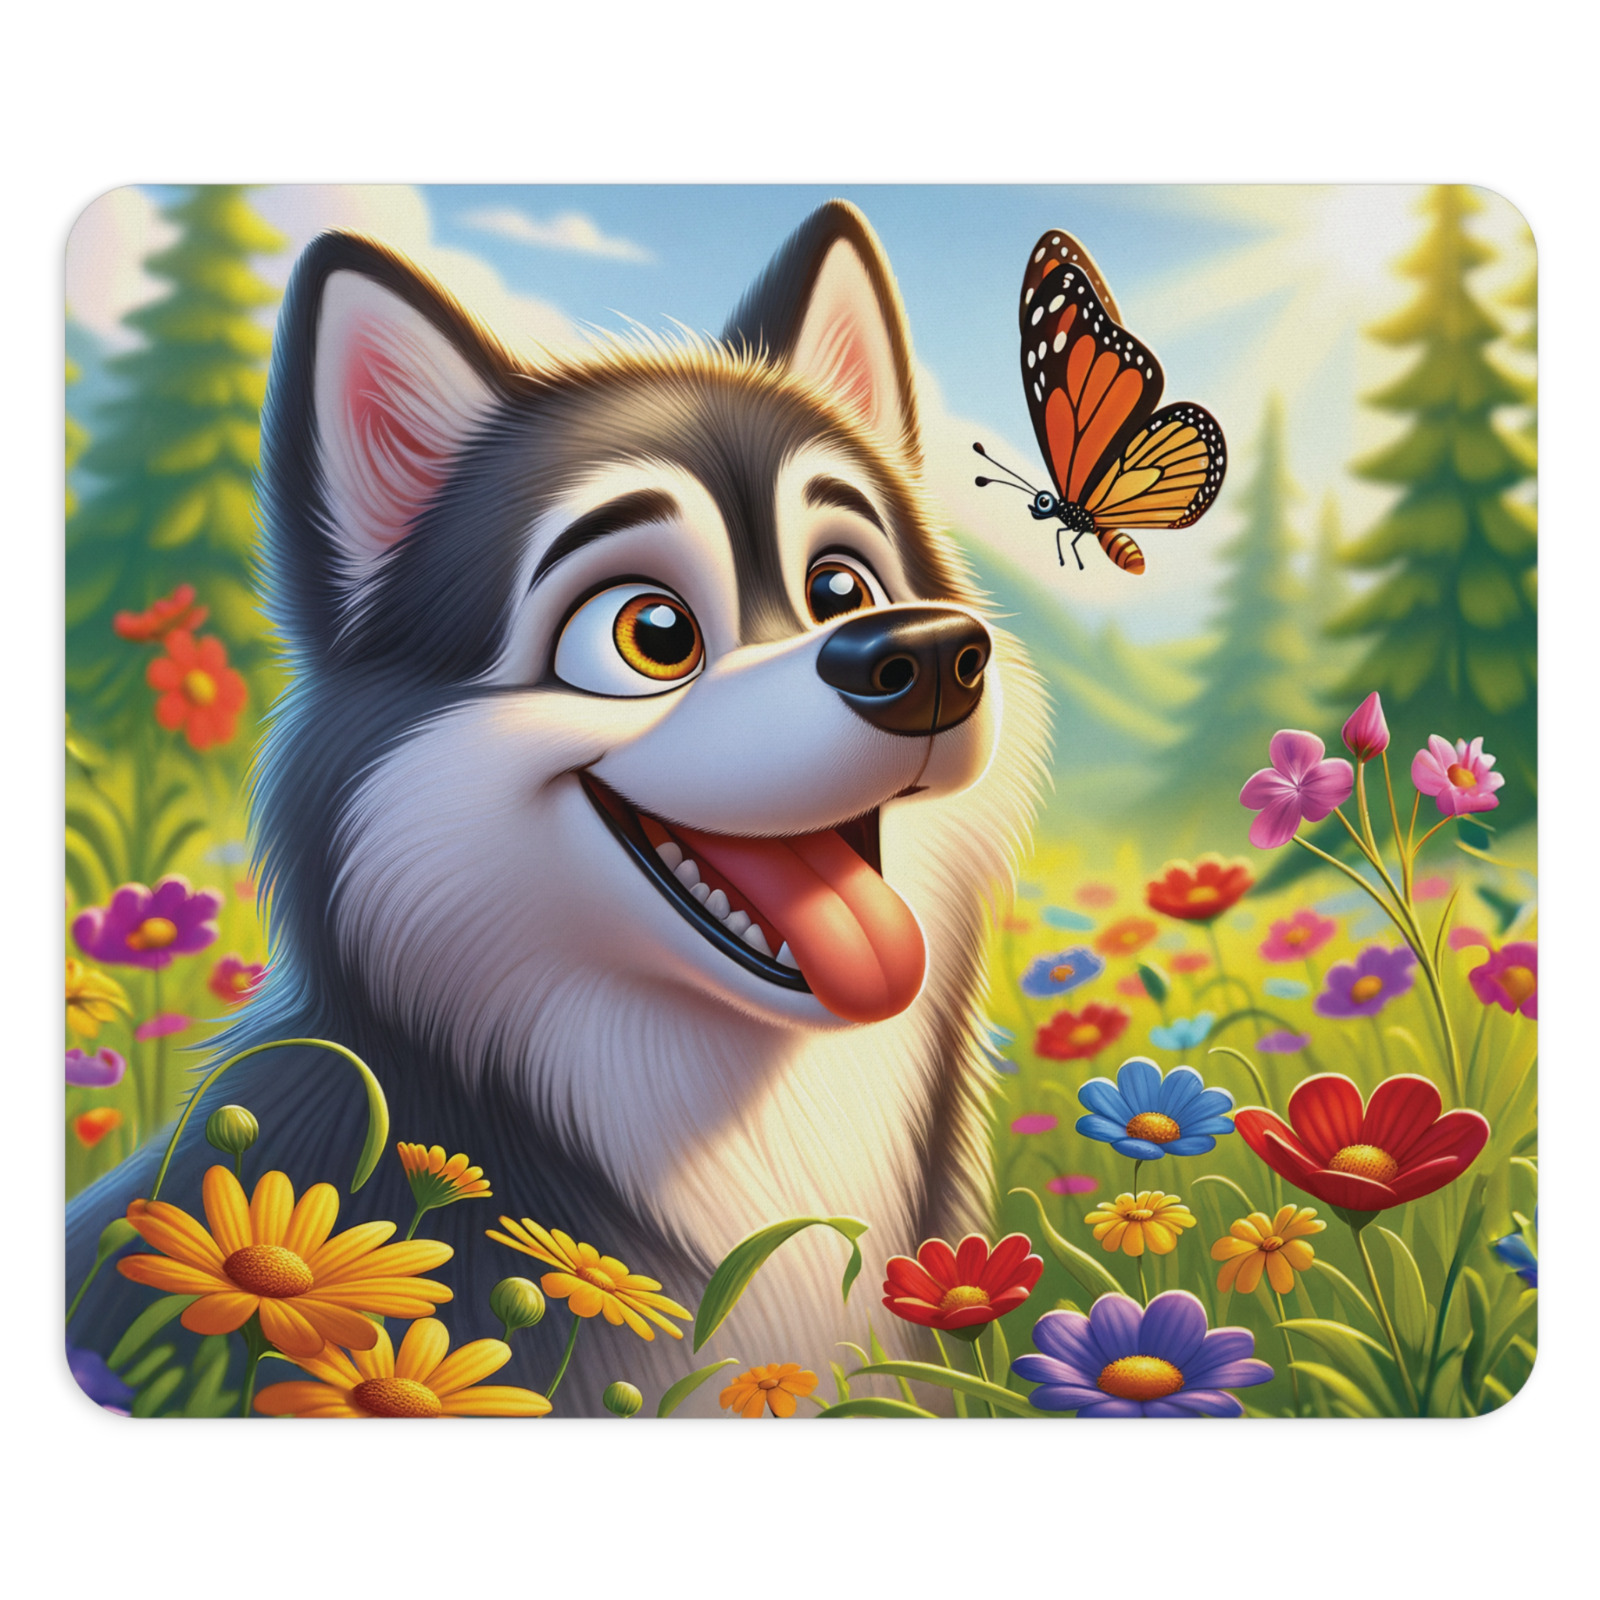 Cute Dog with Flowers and Butterflies Mouse Pad Non-Slip Laptop Accessories Gift